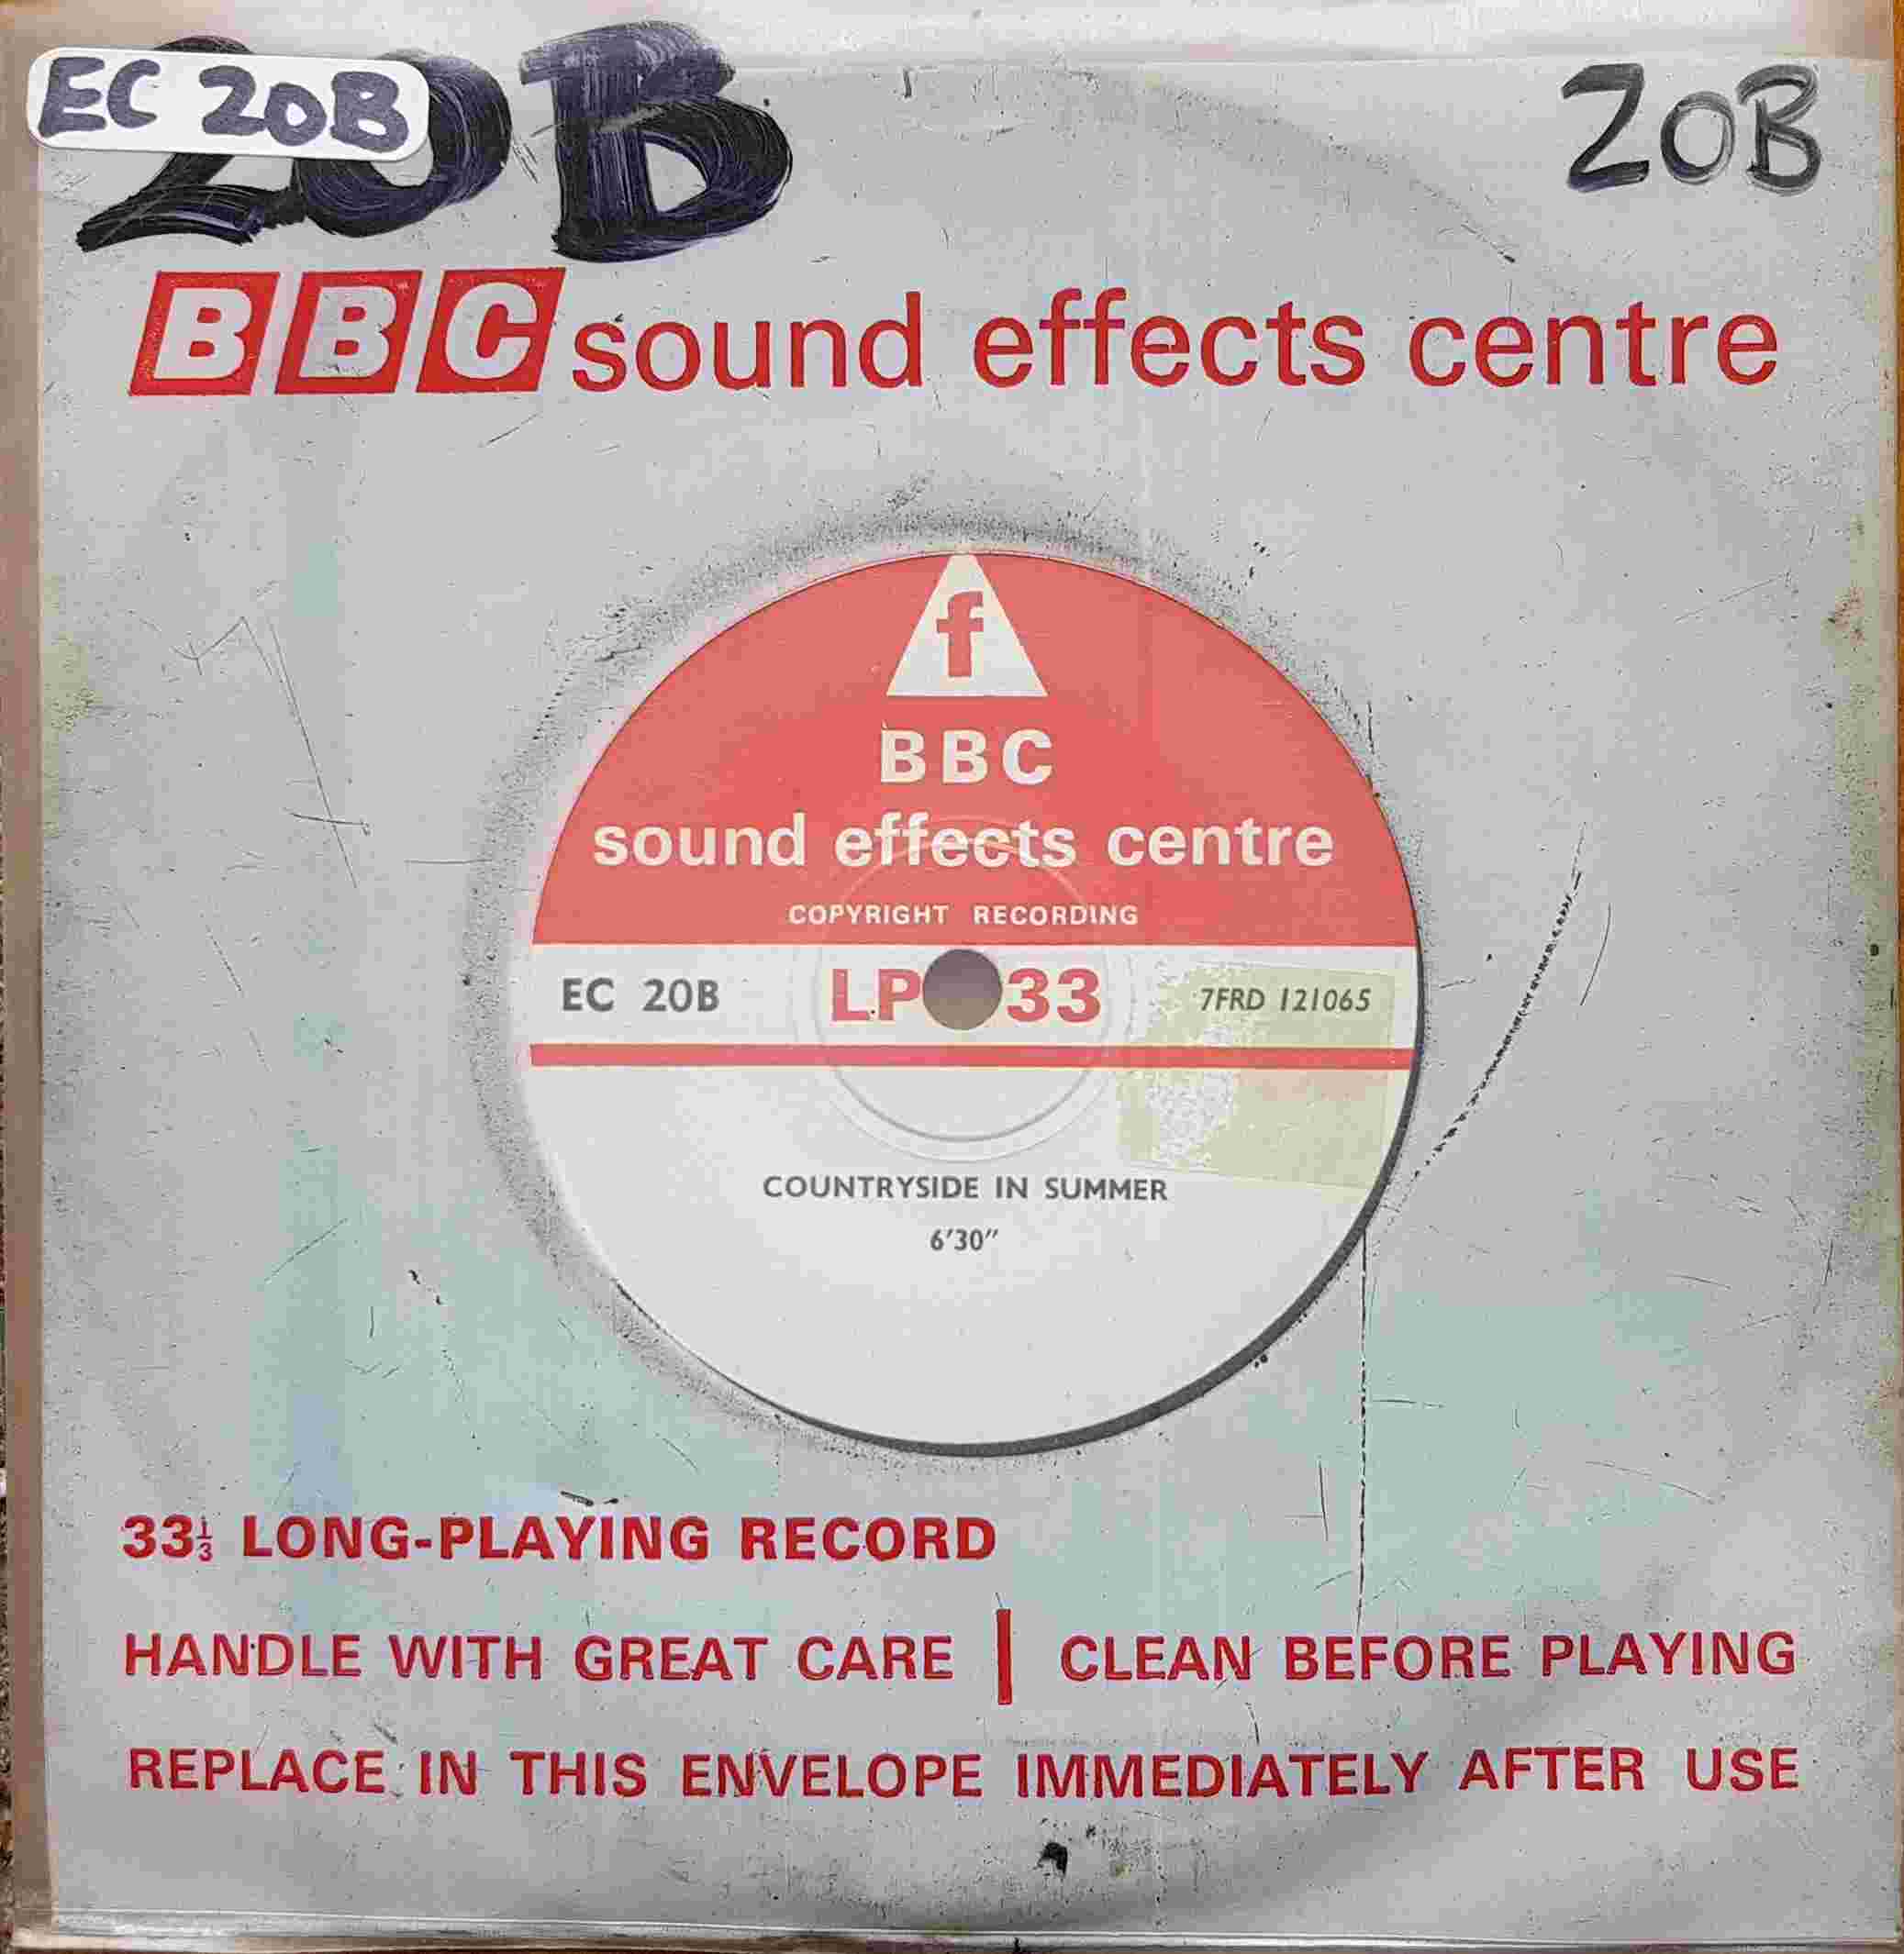 Picture of EC 20B Countryside / Winter in a suburban garden by artist Not registered from the BBC singles - Records and Tapes library